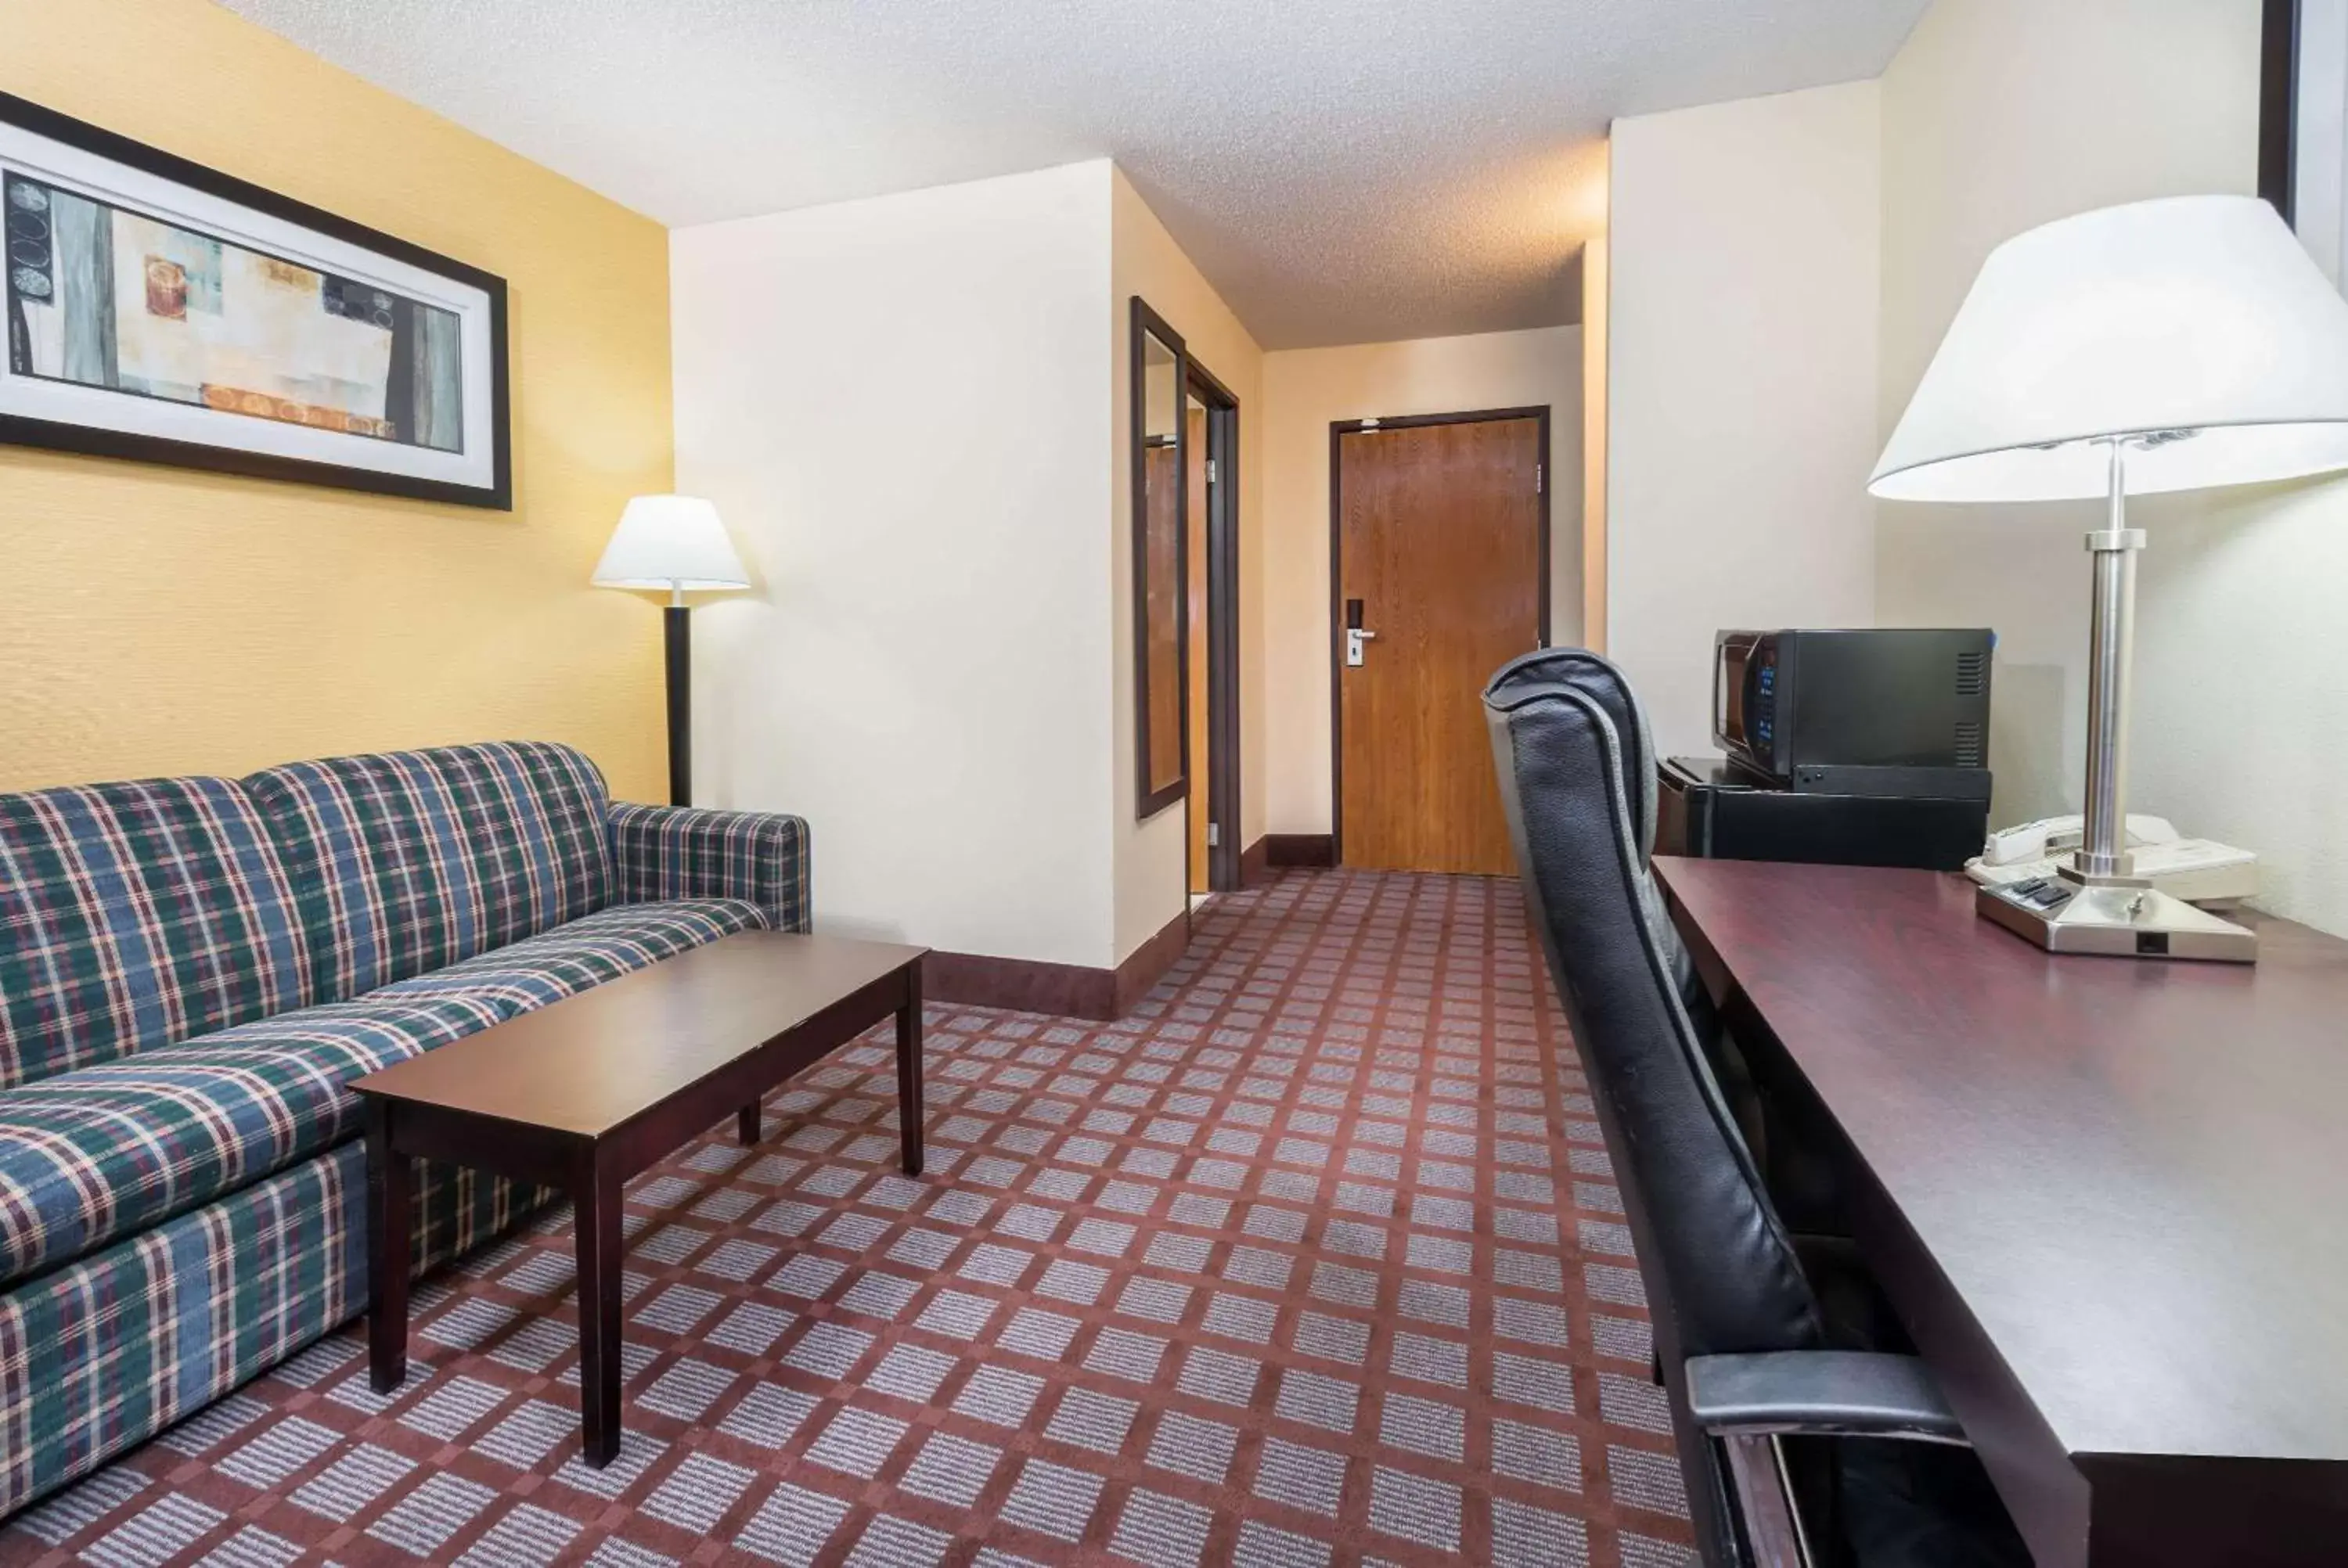 Studio King Suite - Non-Smoking in Super 8 by Wyndham Bloomington, Indiana